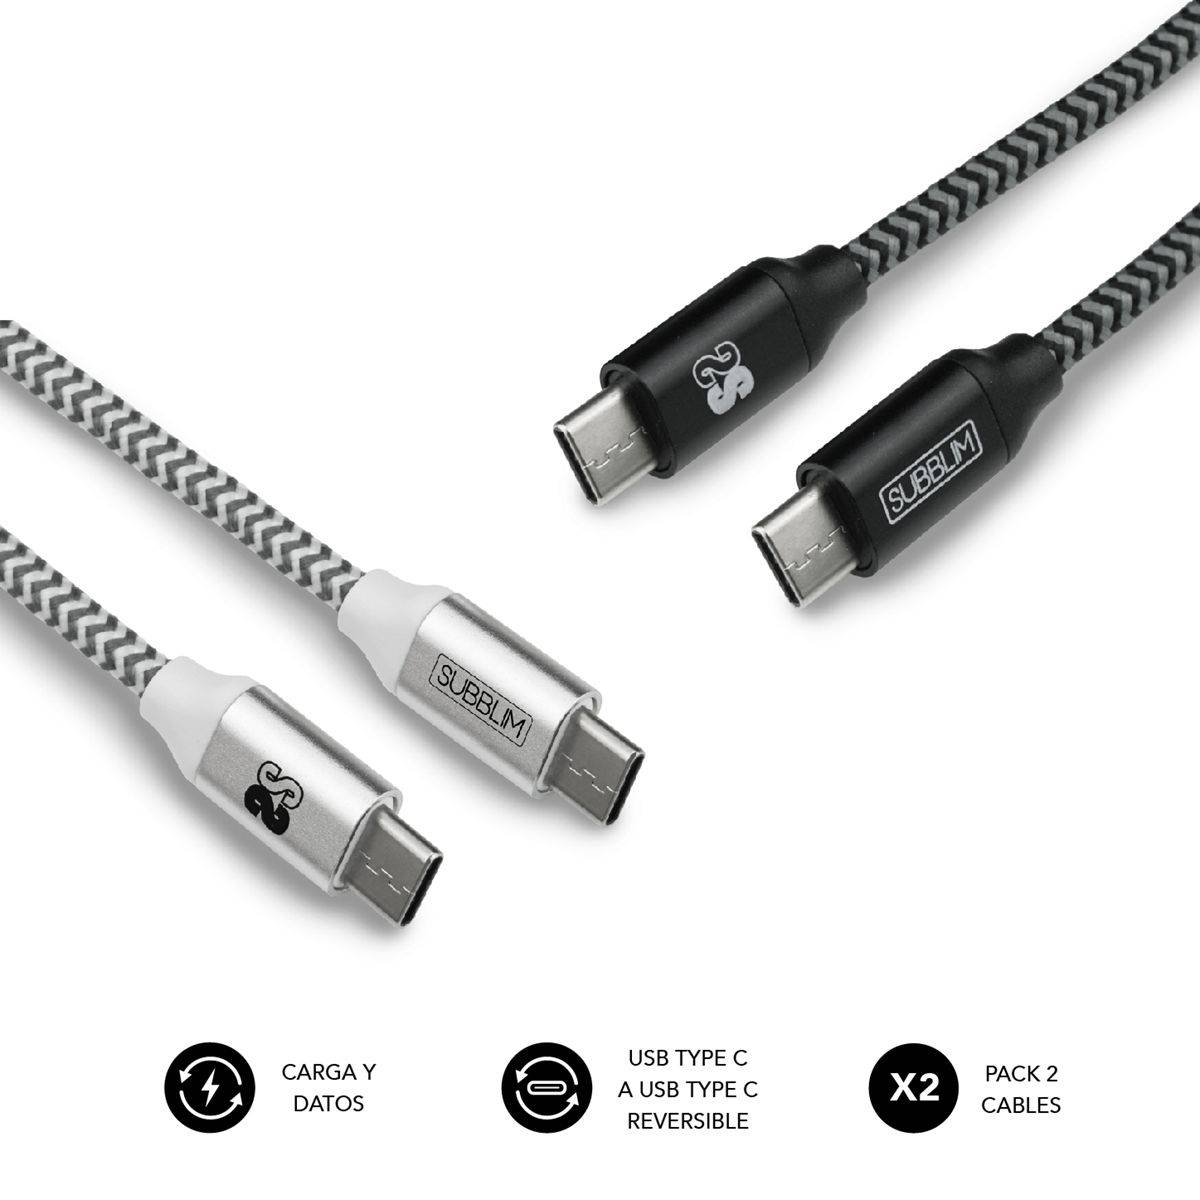 ✓ Pack 2 Cables USB tipo C – USB tipo C (3.0A) Negro/Plata